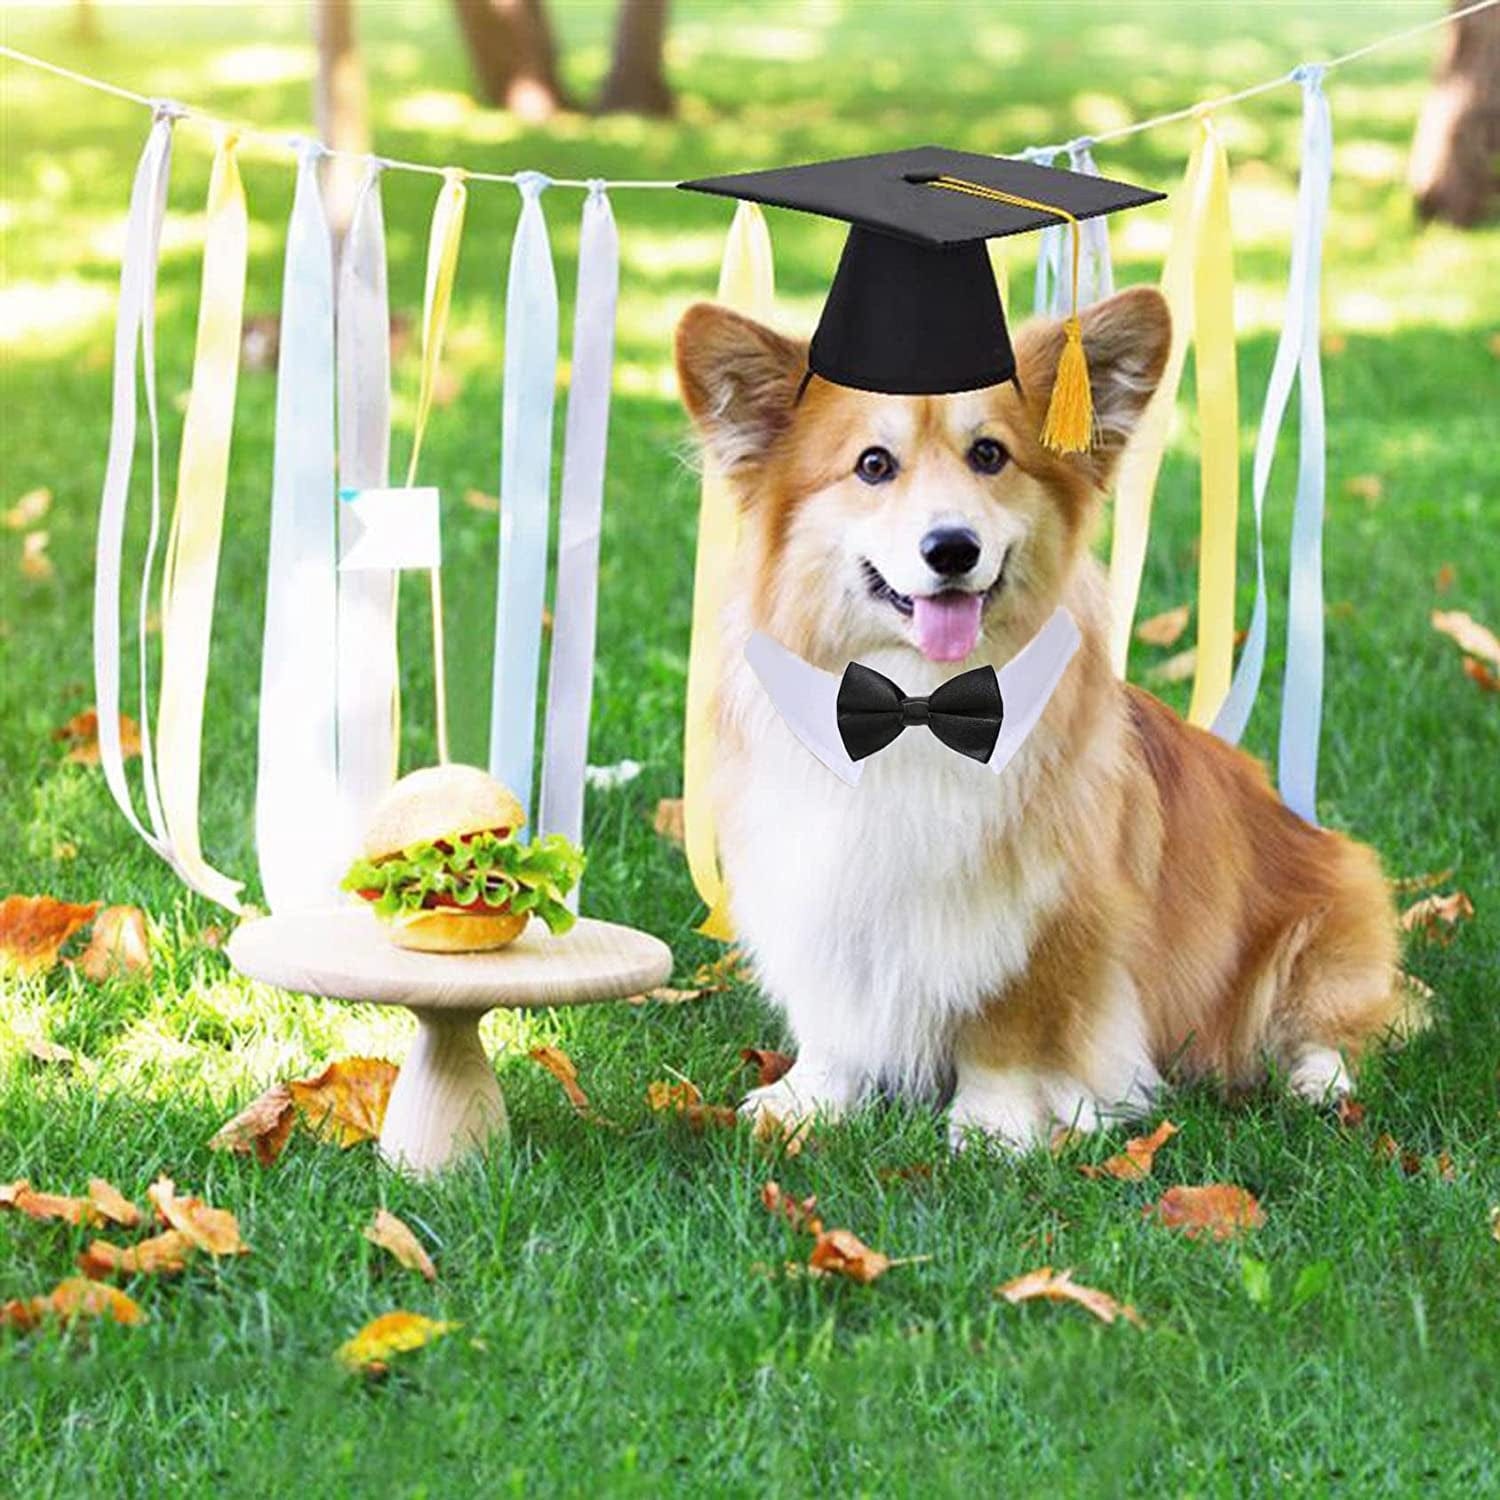 graduation cap for dogs dog graduation cap and gown Dog Hat Dog Supplies Pet  | eBay